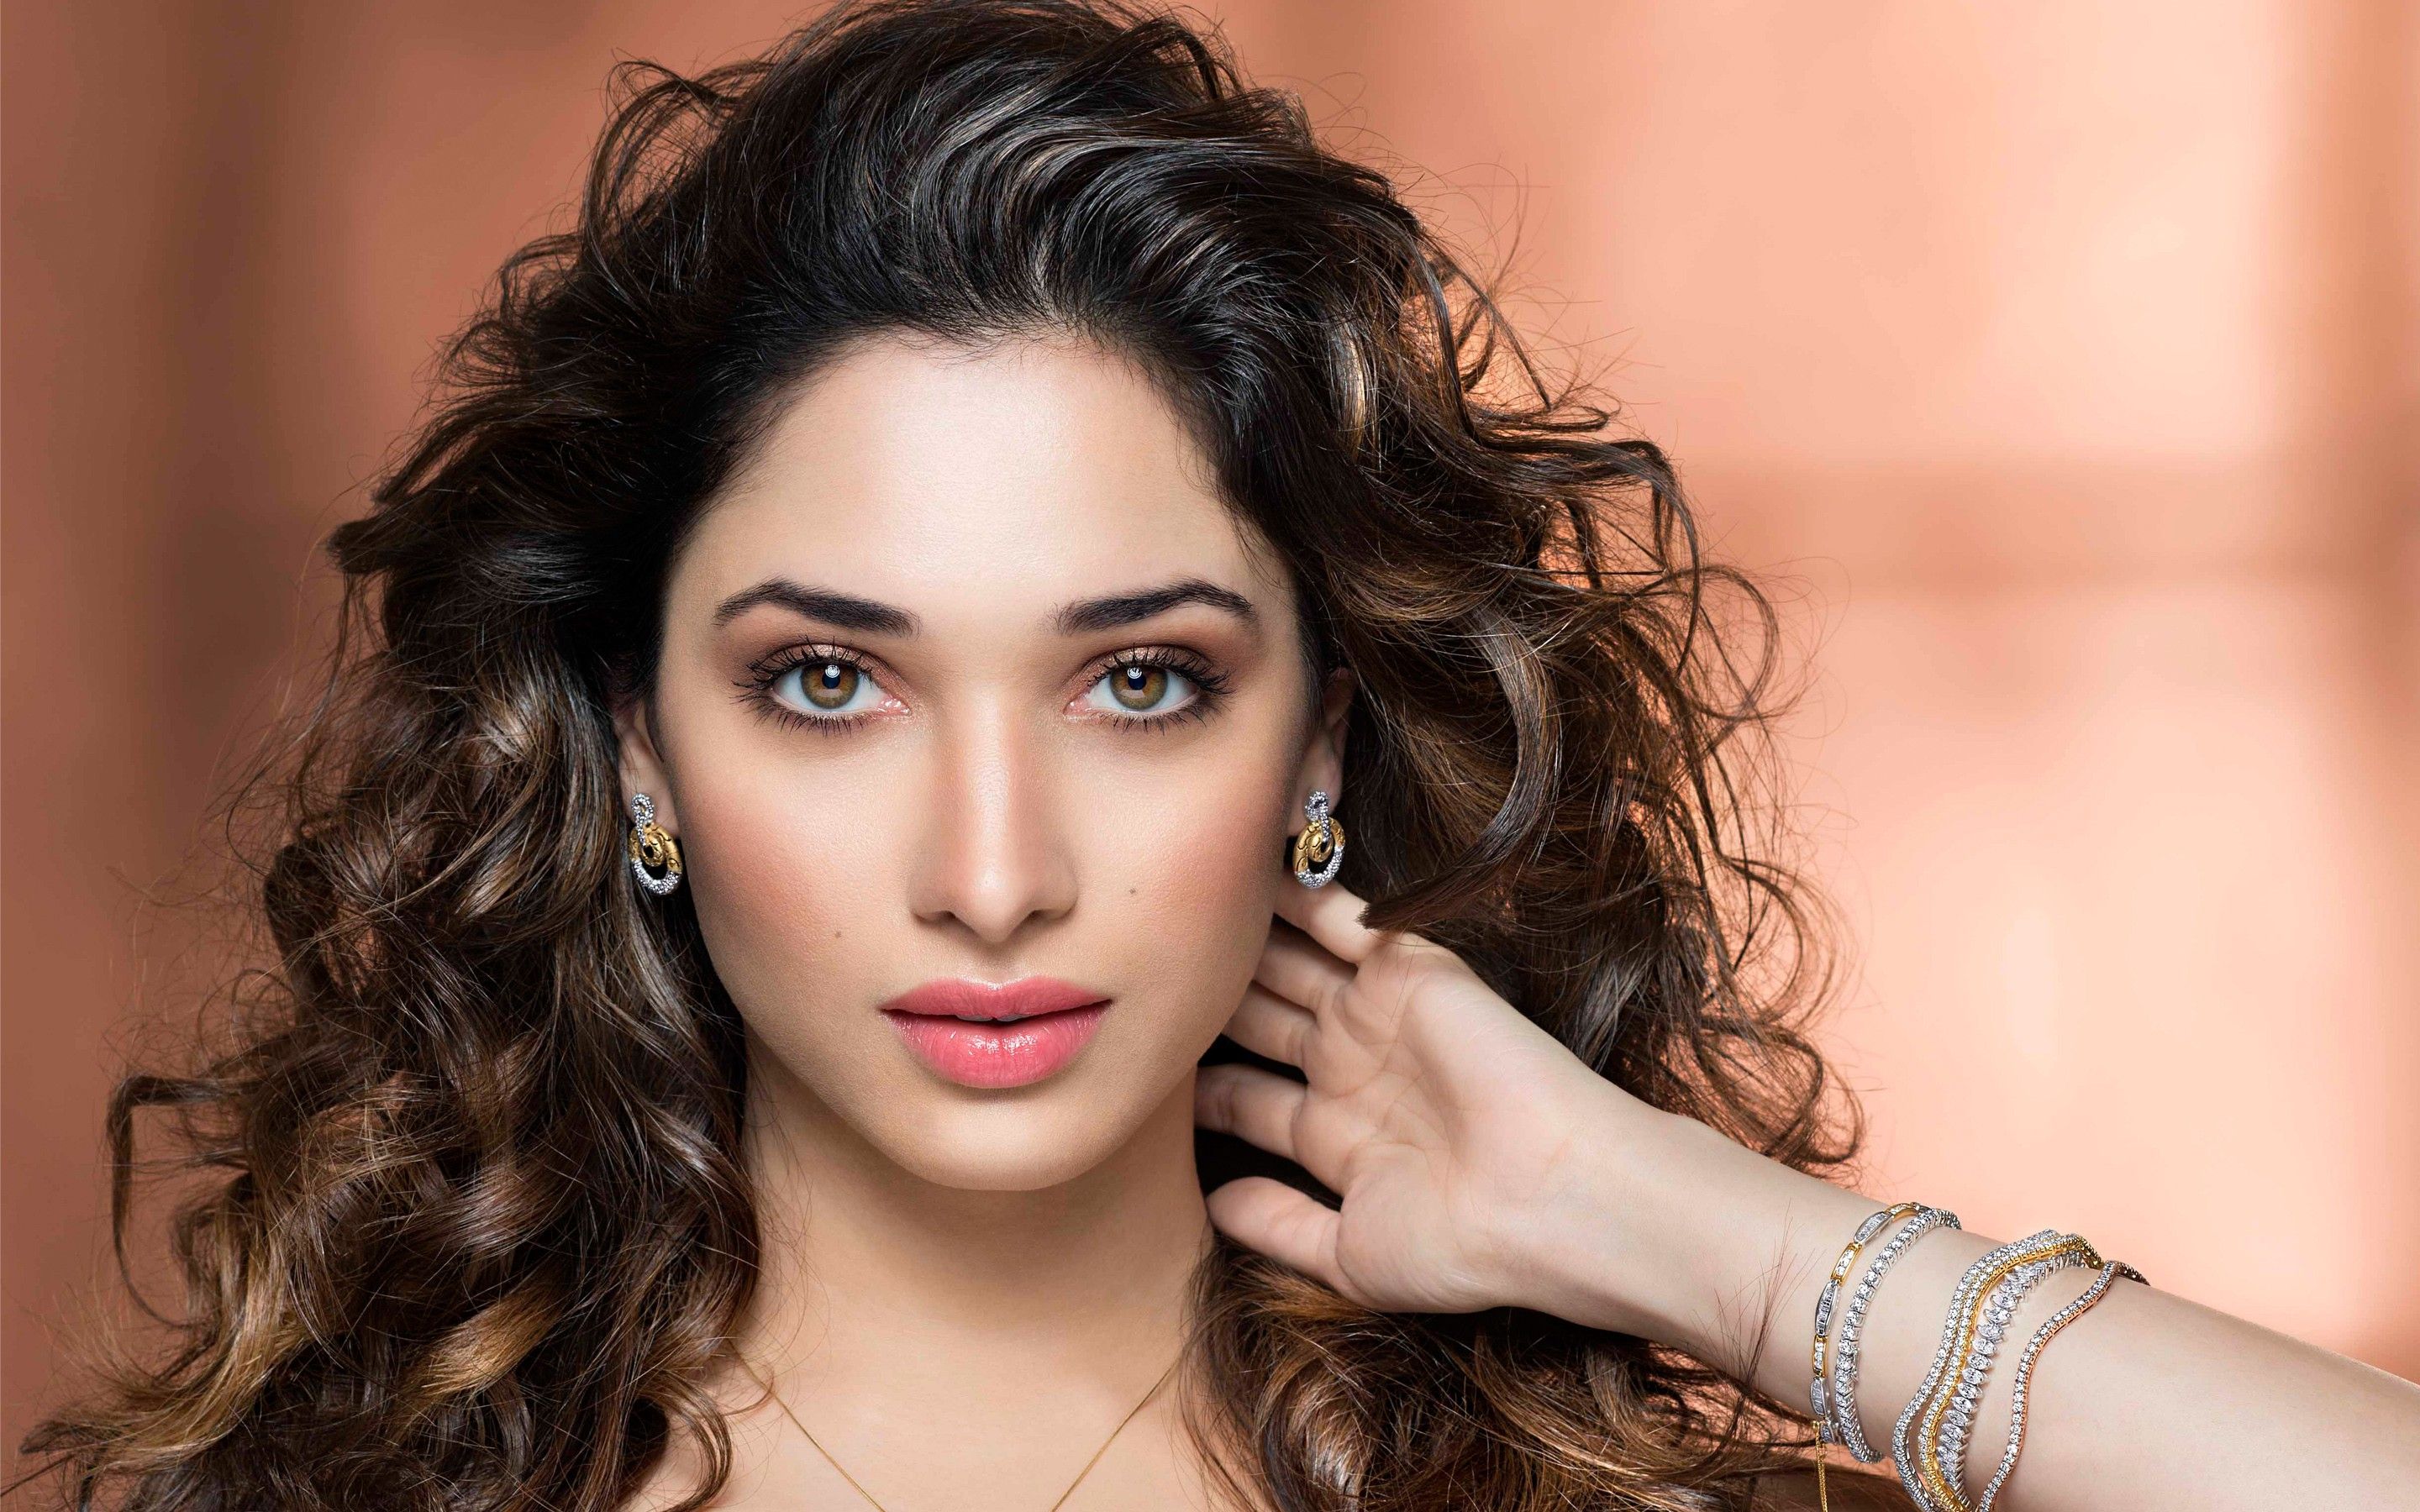 Tamanna Bhatia Wallpapers Free for Desktop - New HD Wallpapers